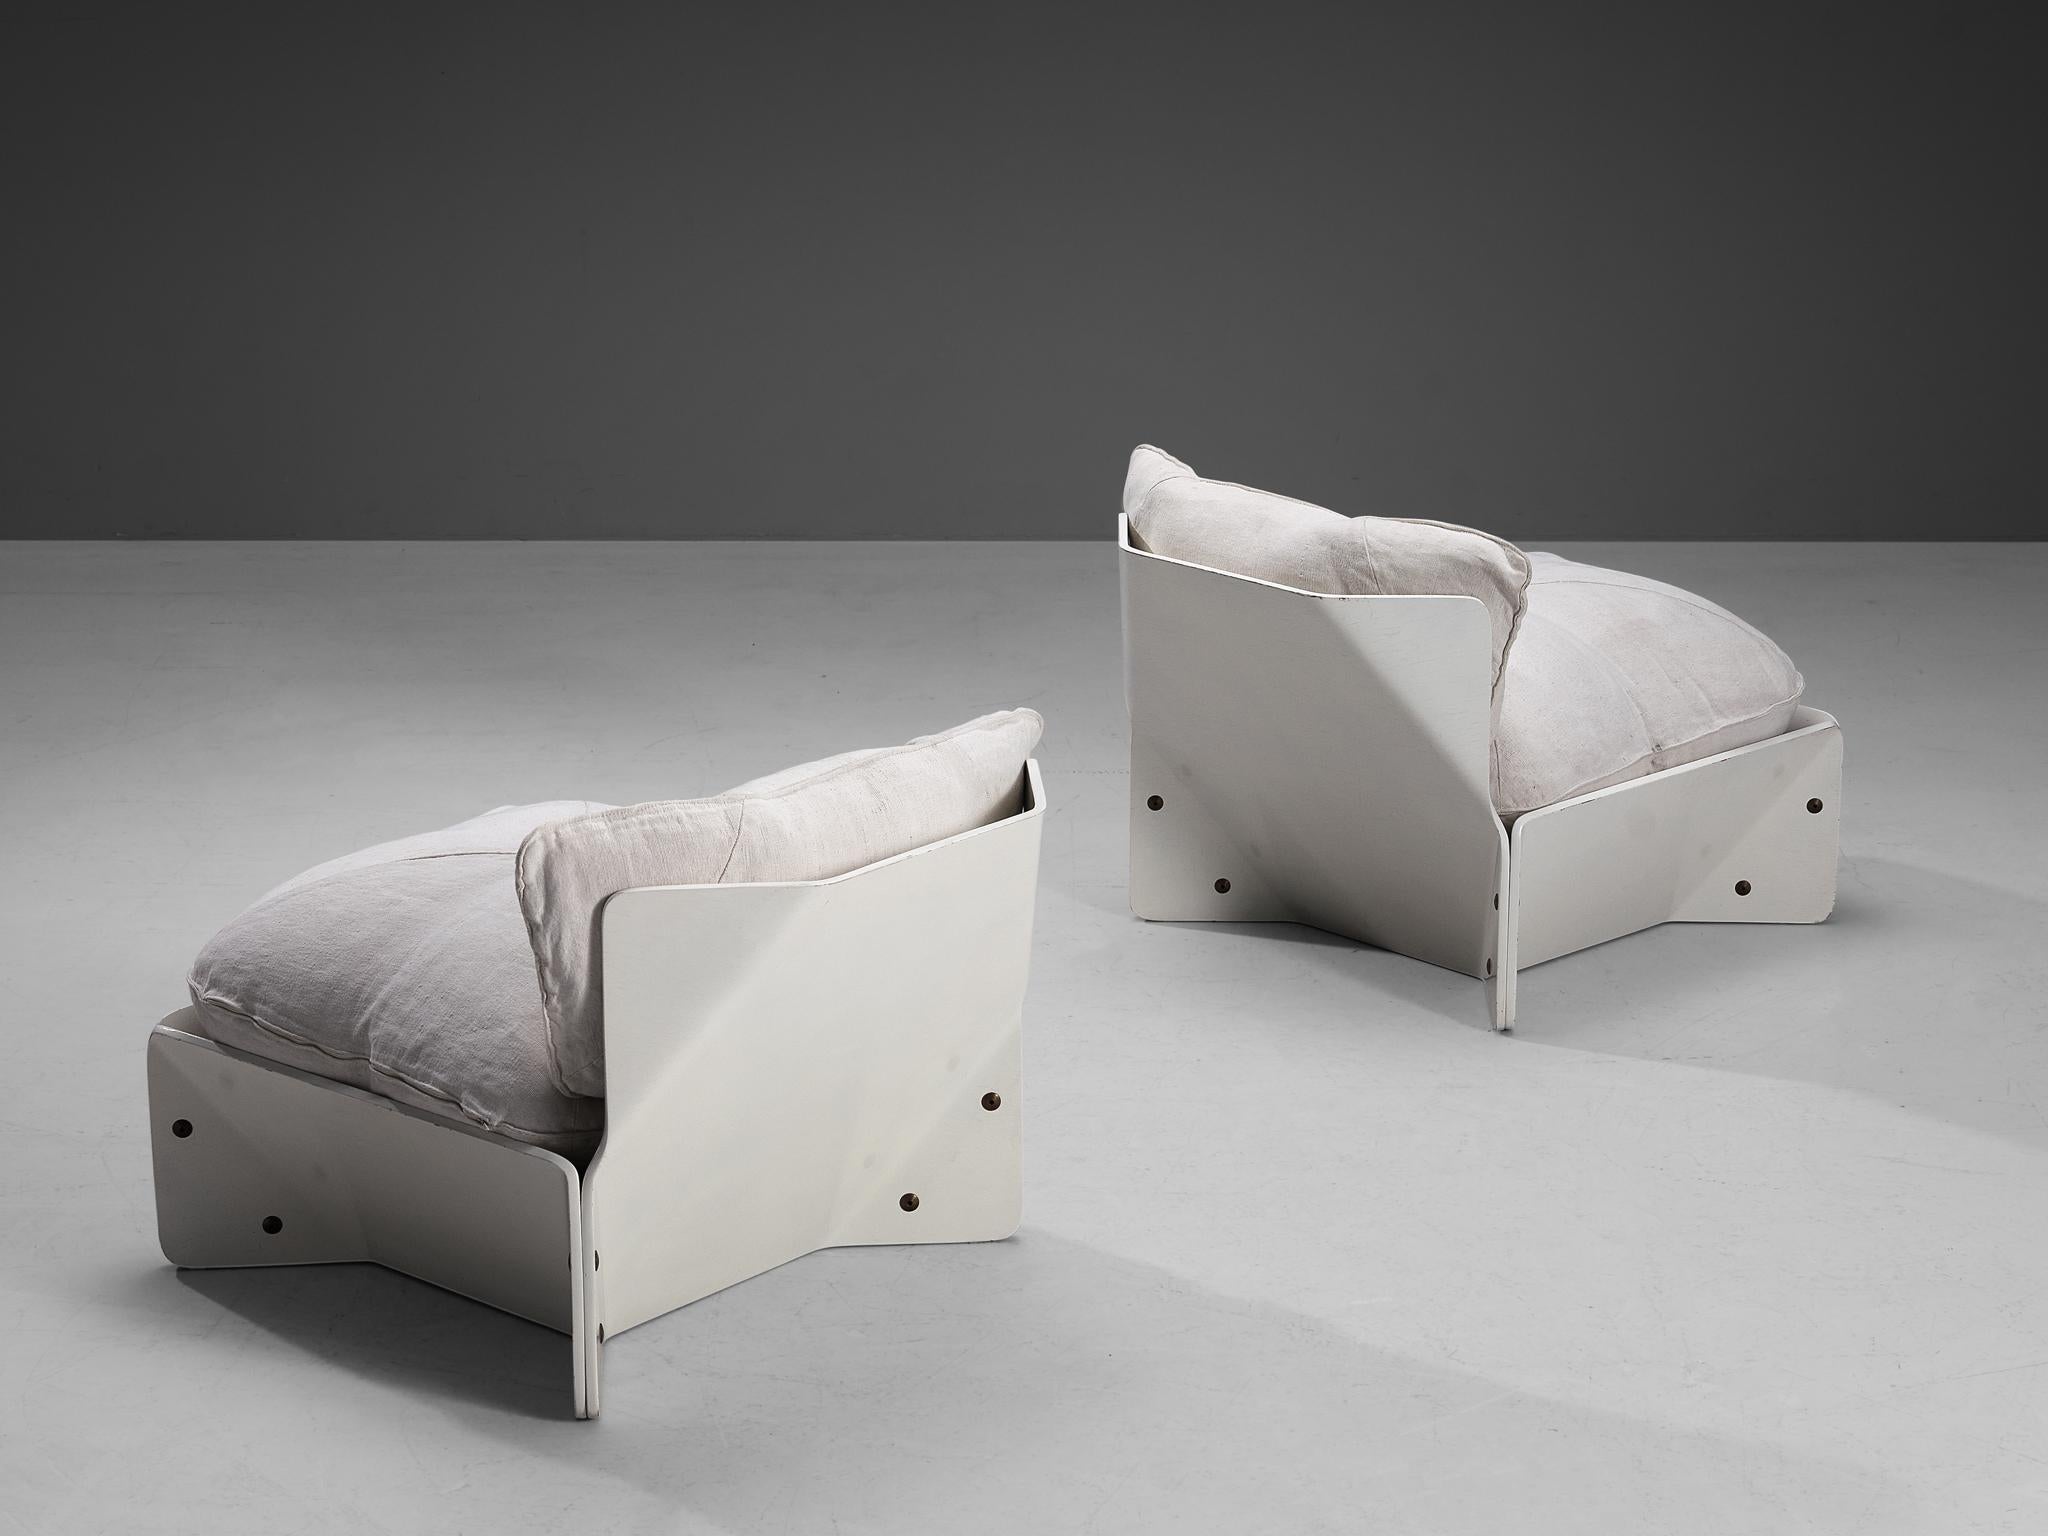 Christensen & Larsen, pair of lounge chairs, lacquered wood, fabric, Denmark, 1970s.

Stunning pair of Postmodern lounge chairs manufactured by the Danish company Christensen & Larsen. The overall design of the chairs is truly unique and resembles